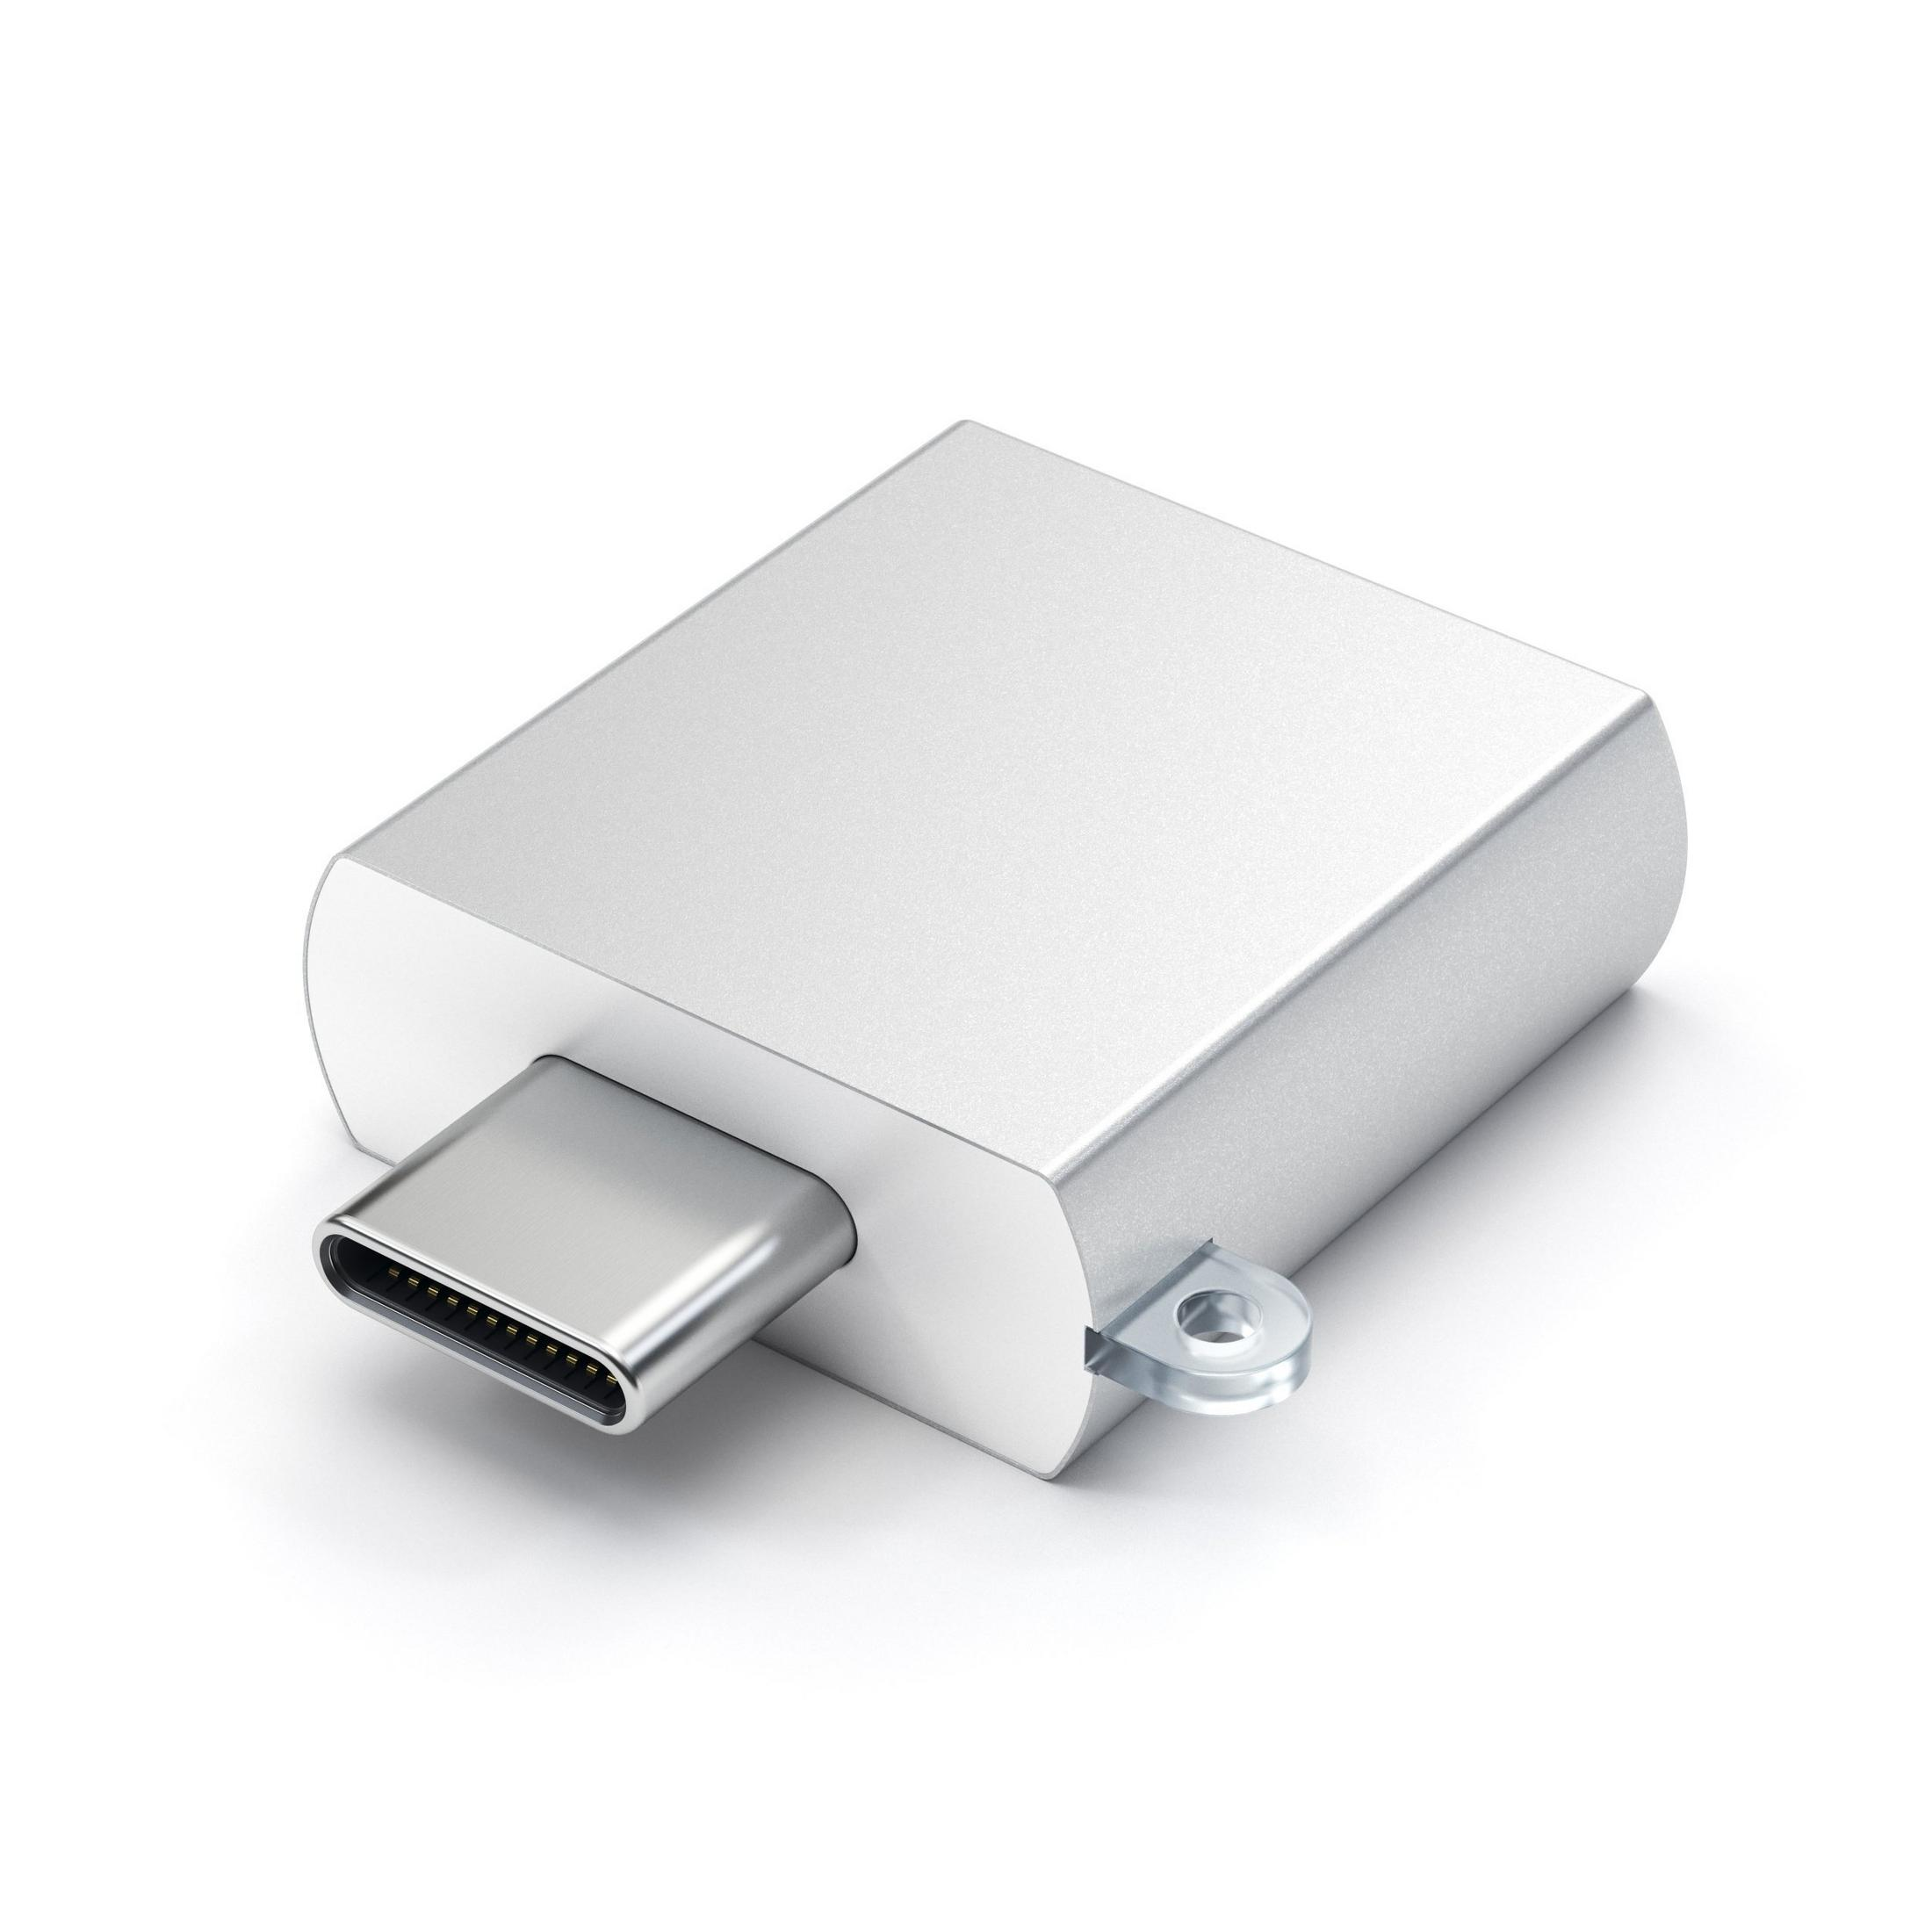 TYPE-C 179965 SATECHI SILBER Silber USB Adapter, ADAPTER